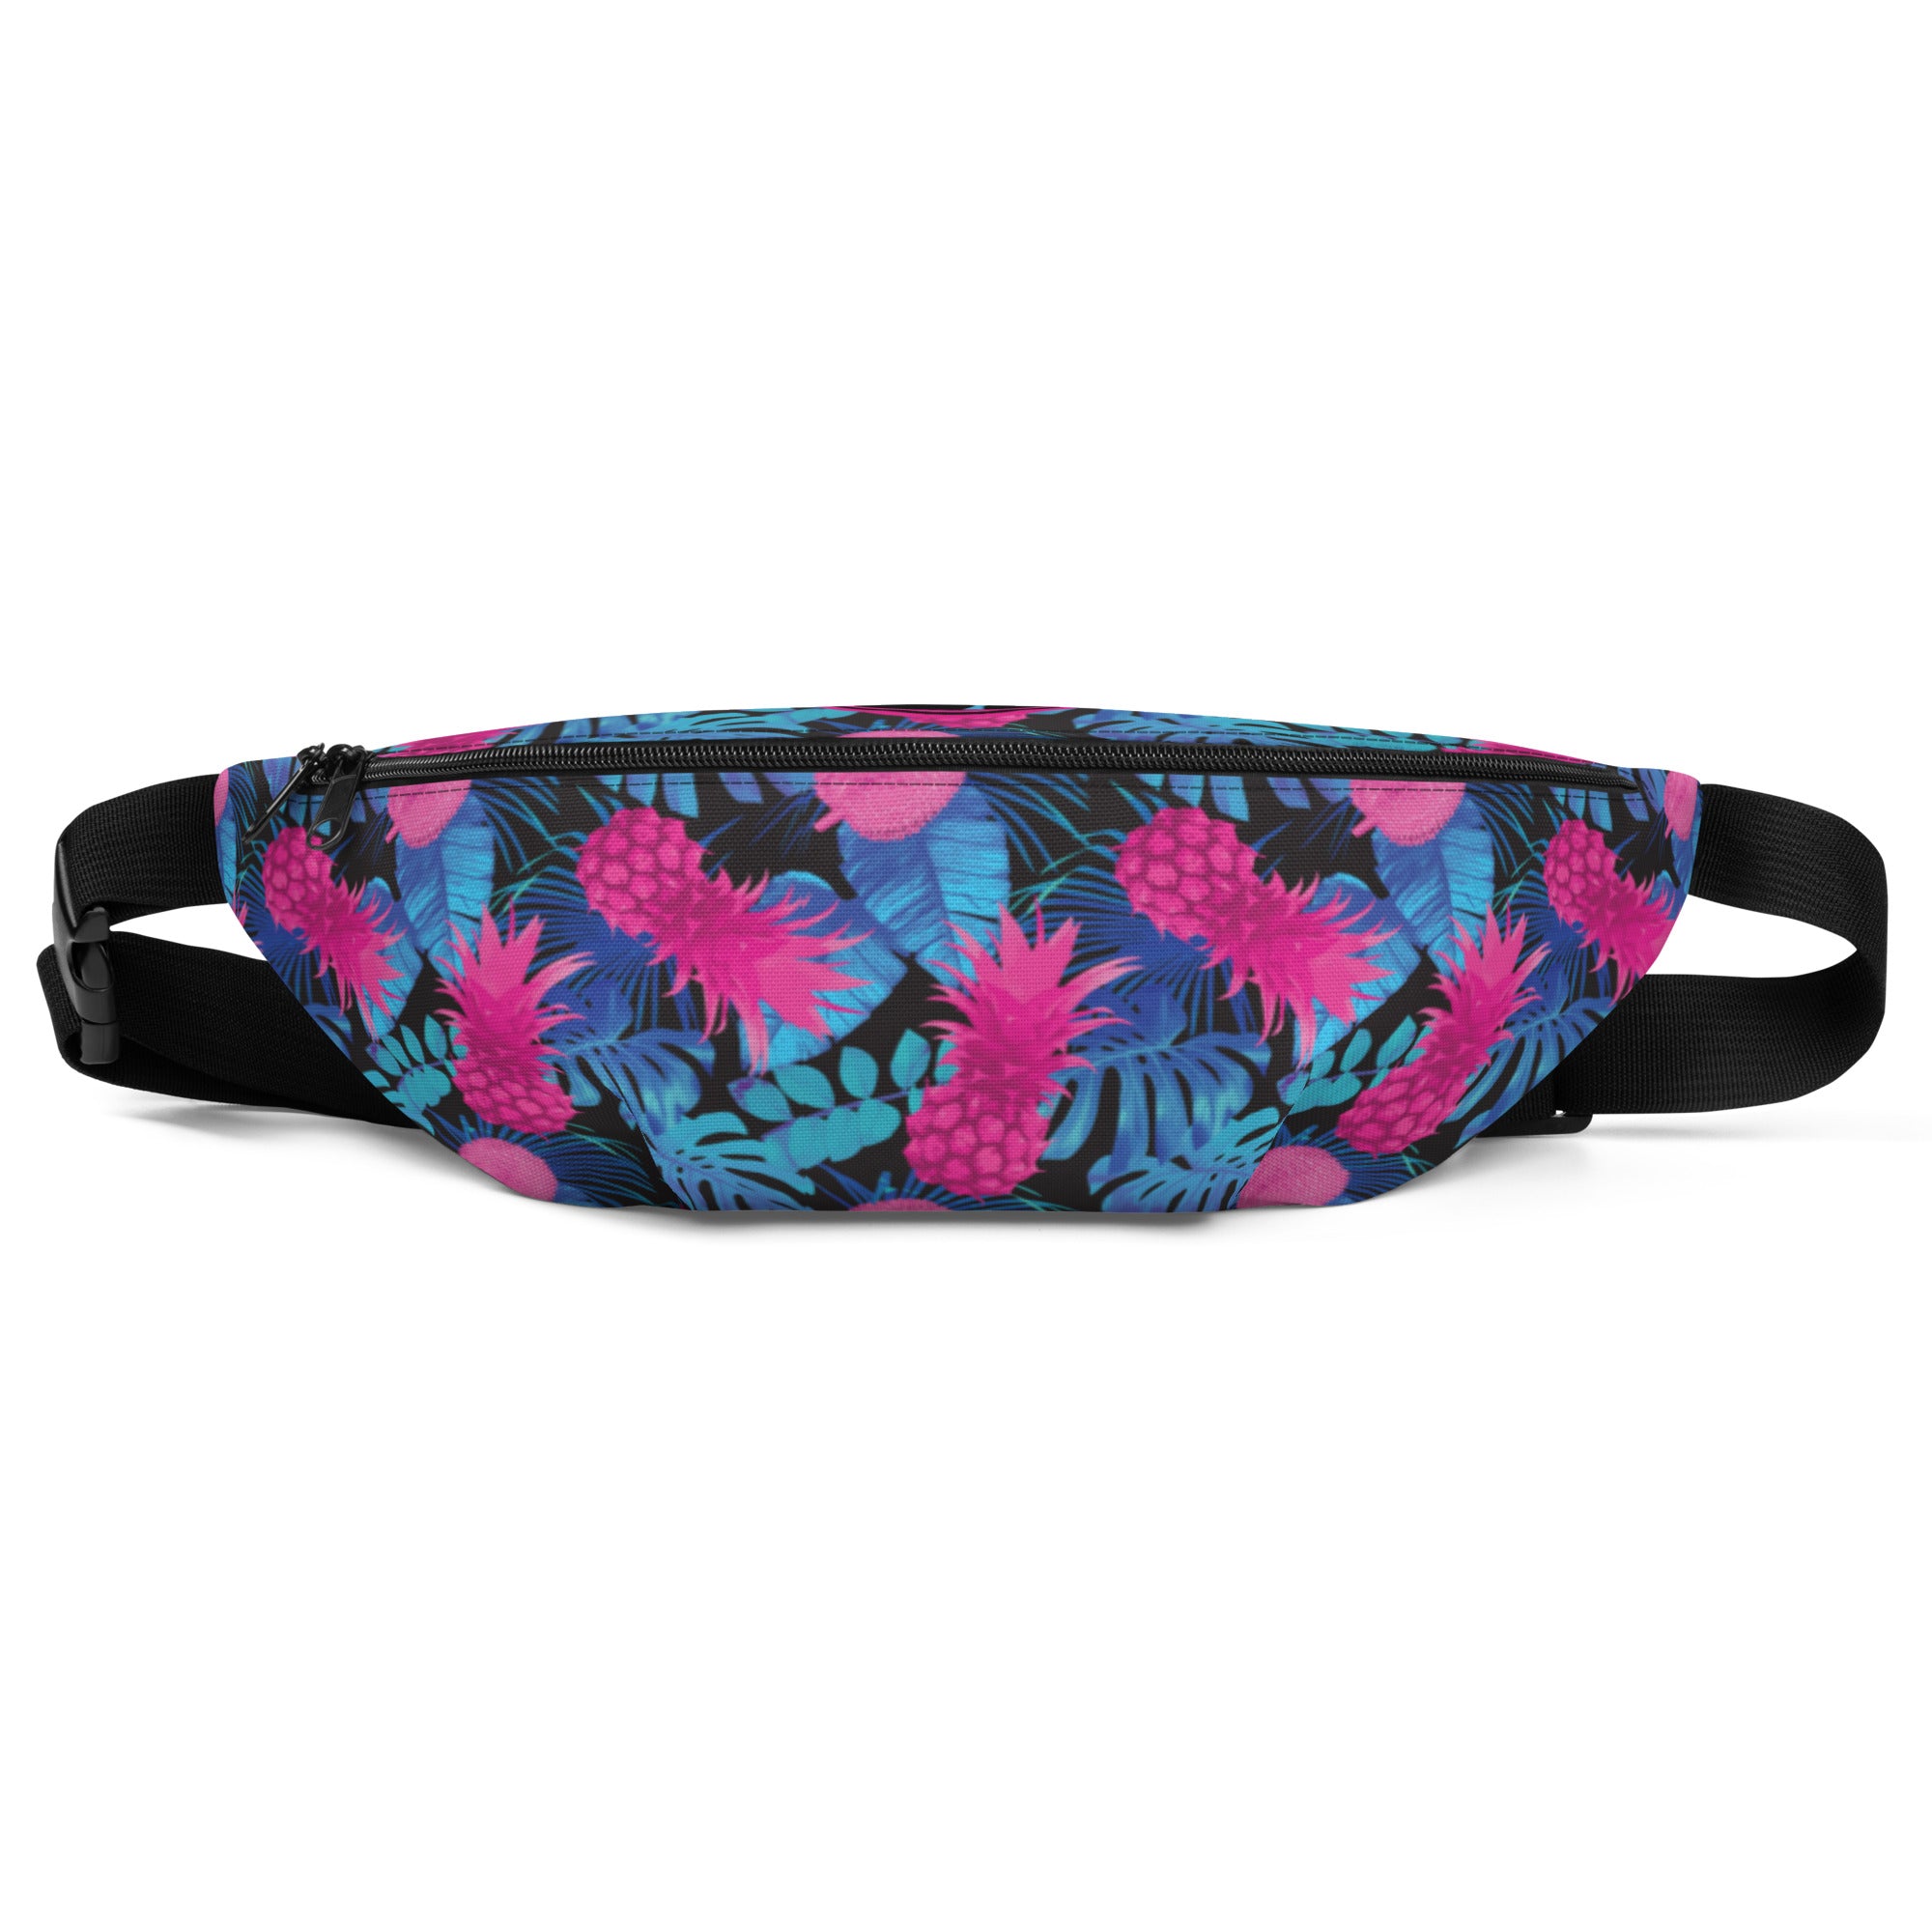 Pineapple Express Fanny Pack